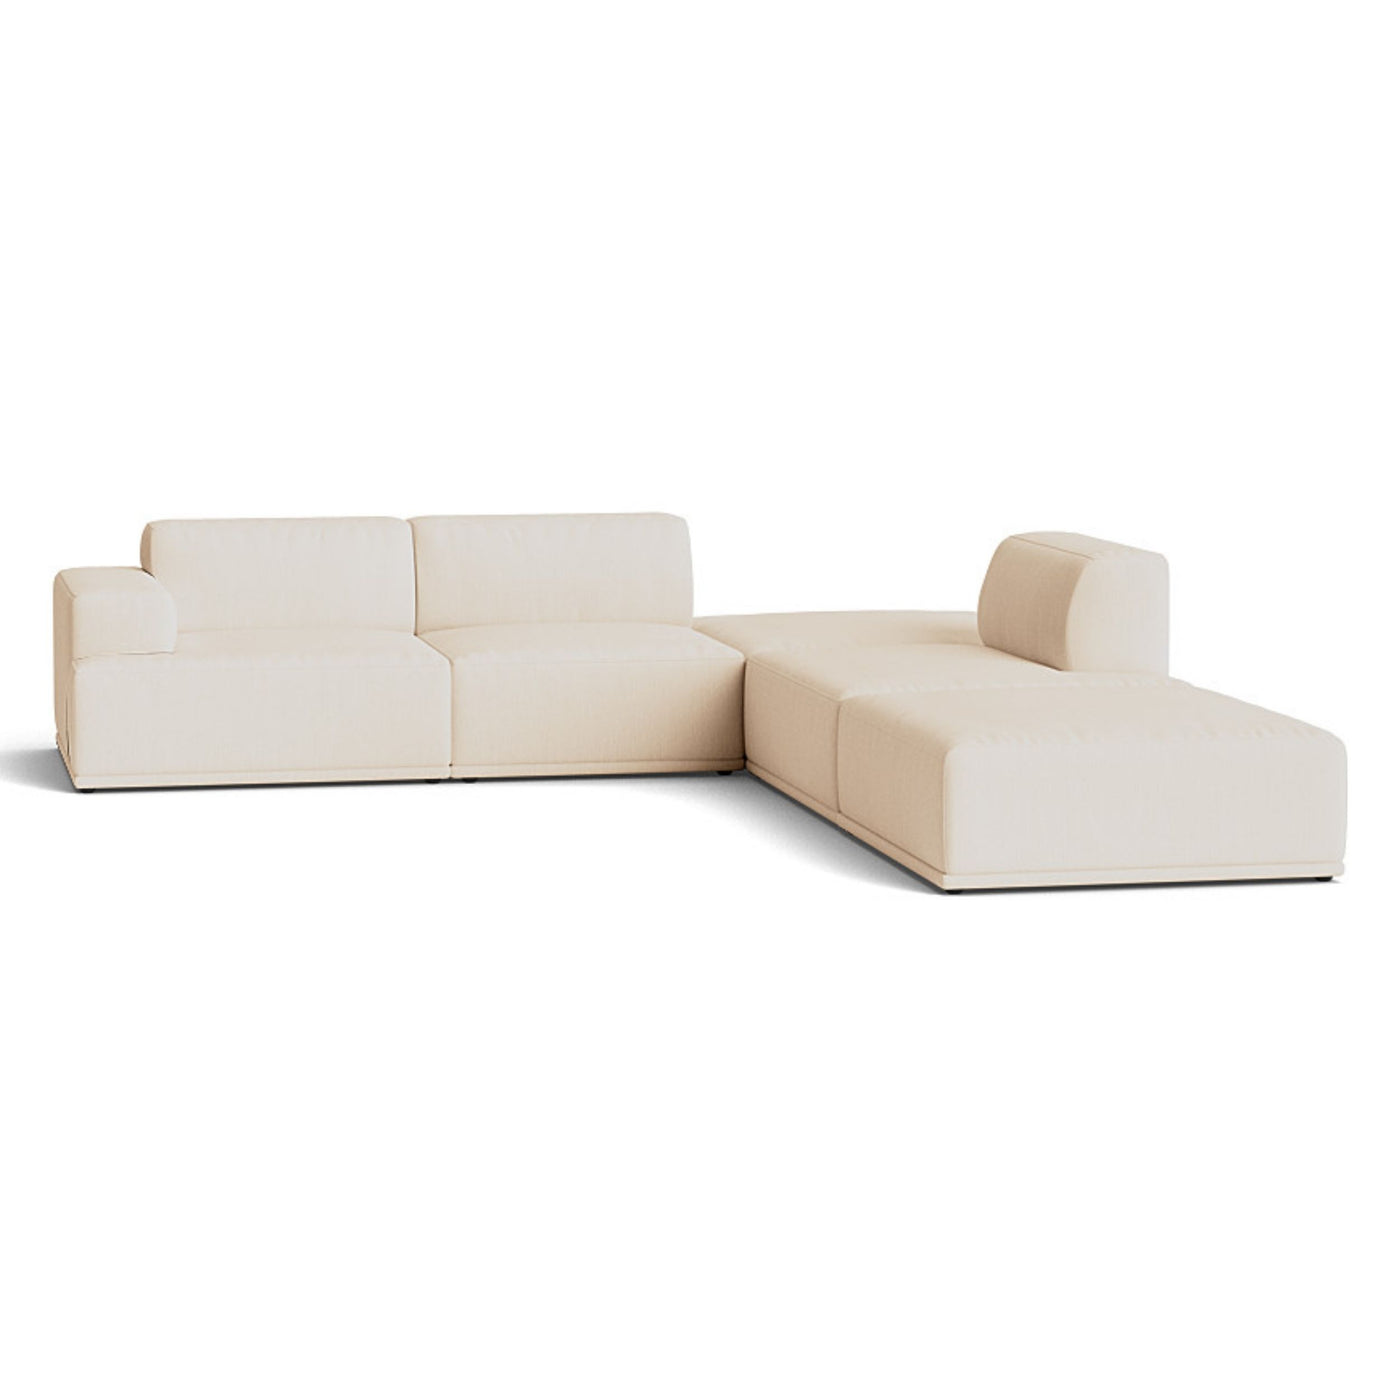 Muuto Connect Soft Modular Corner Sofa, configuration 3. made-to-order from someday designs. #colour_balder-612